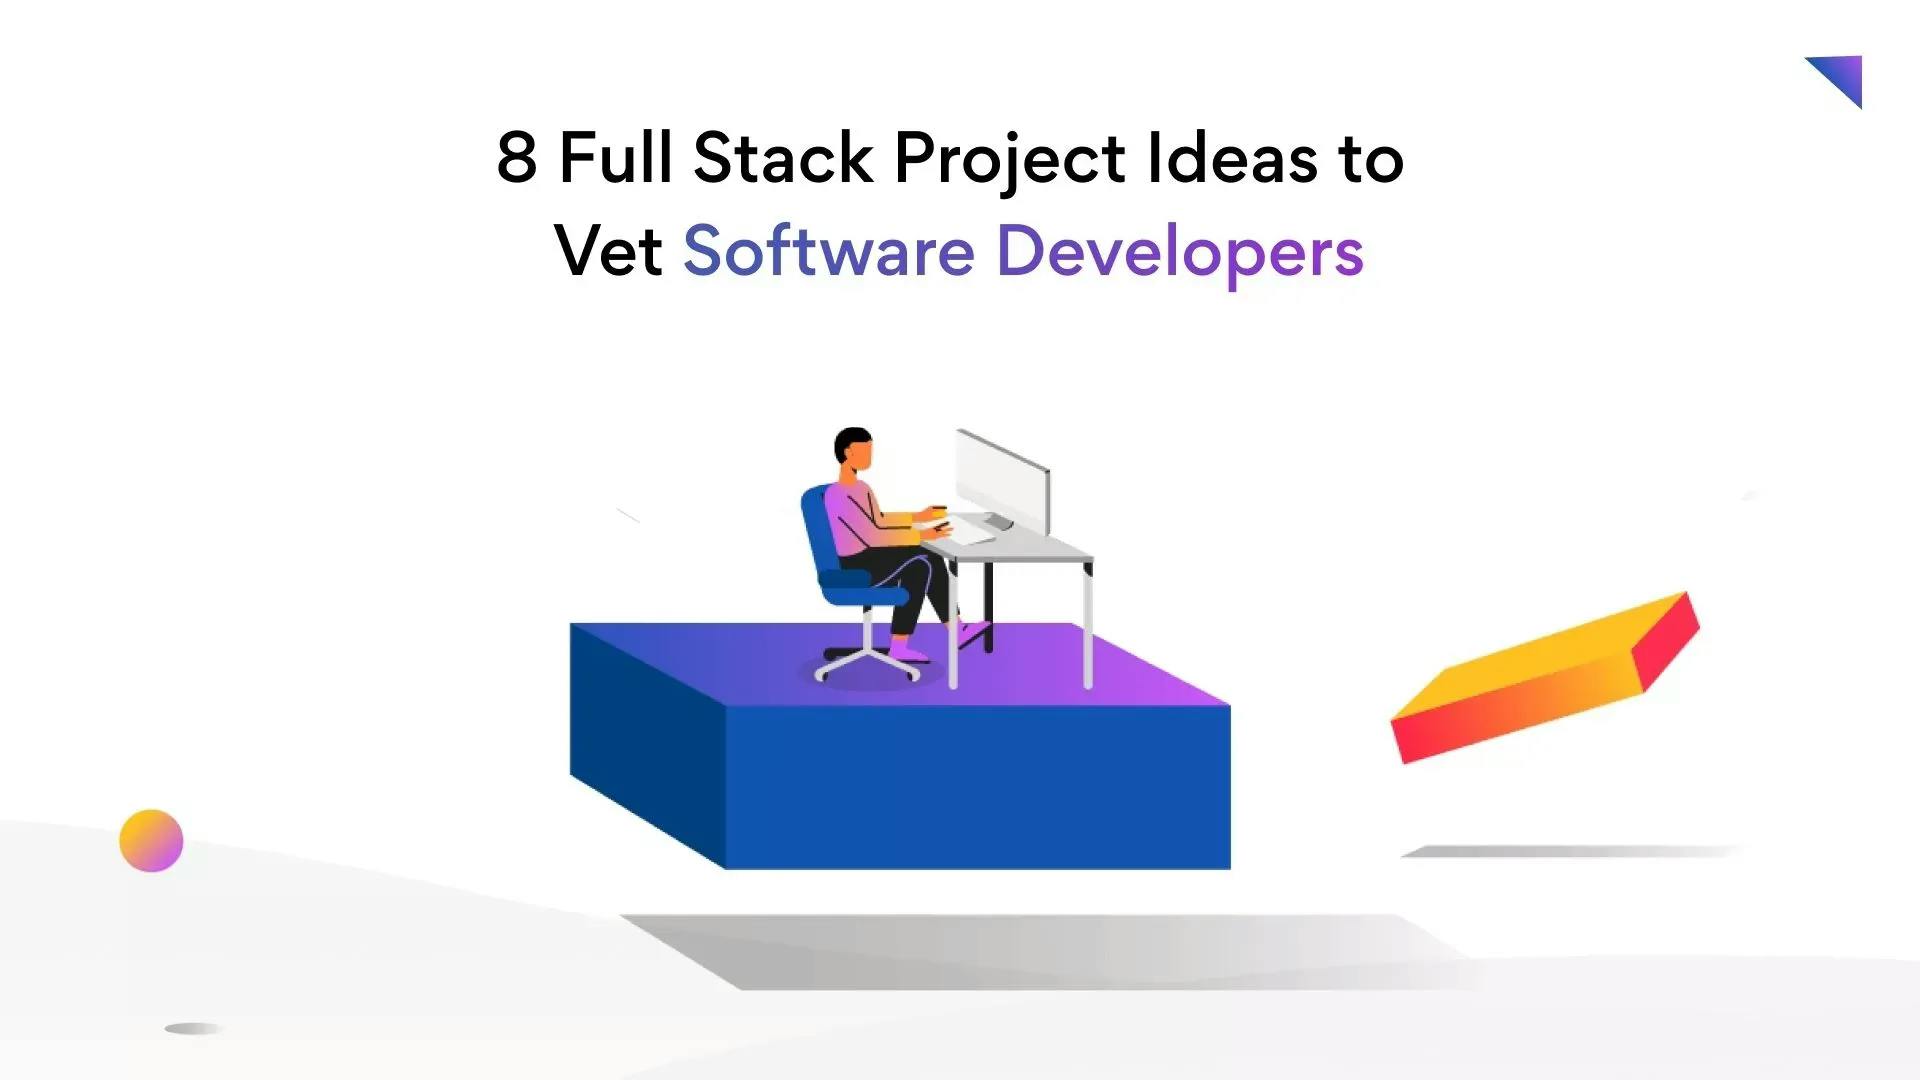 Eight Full Stack Project Ideas for 2022